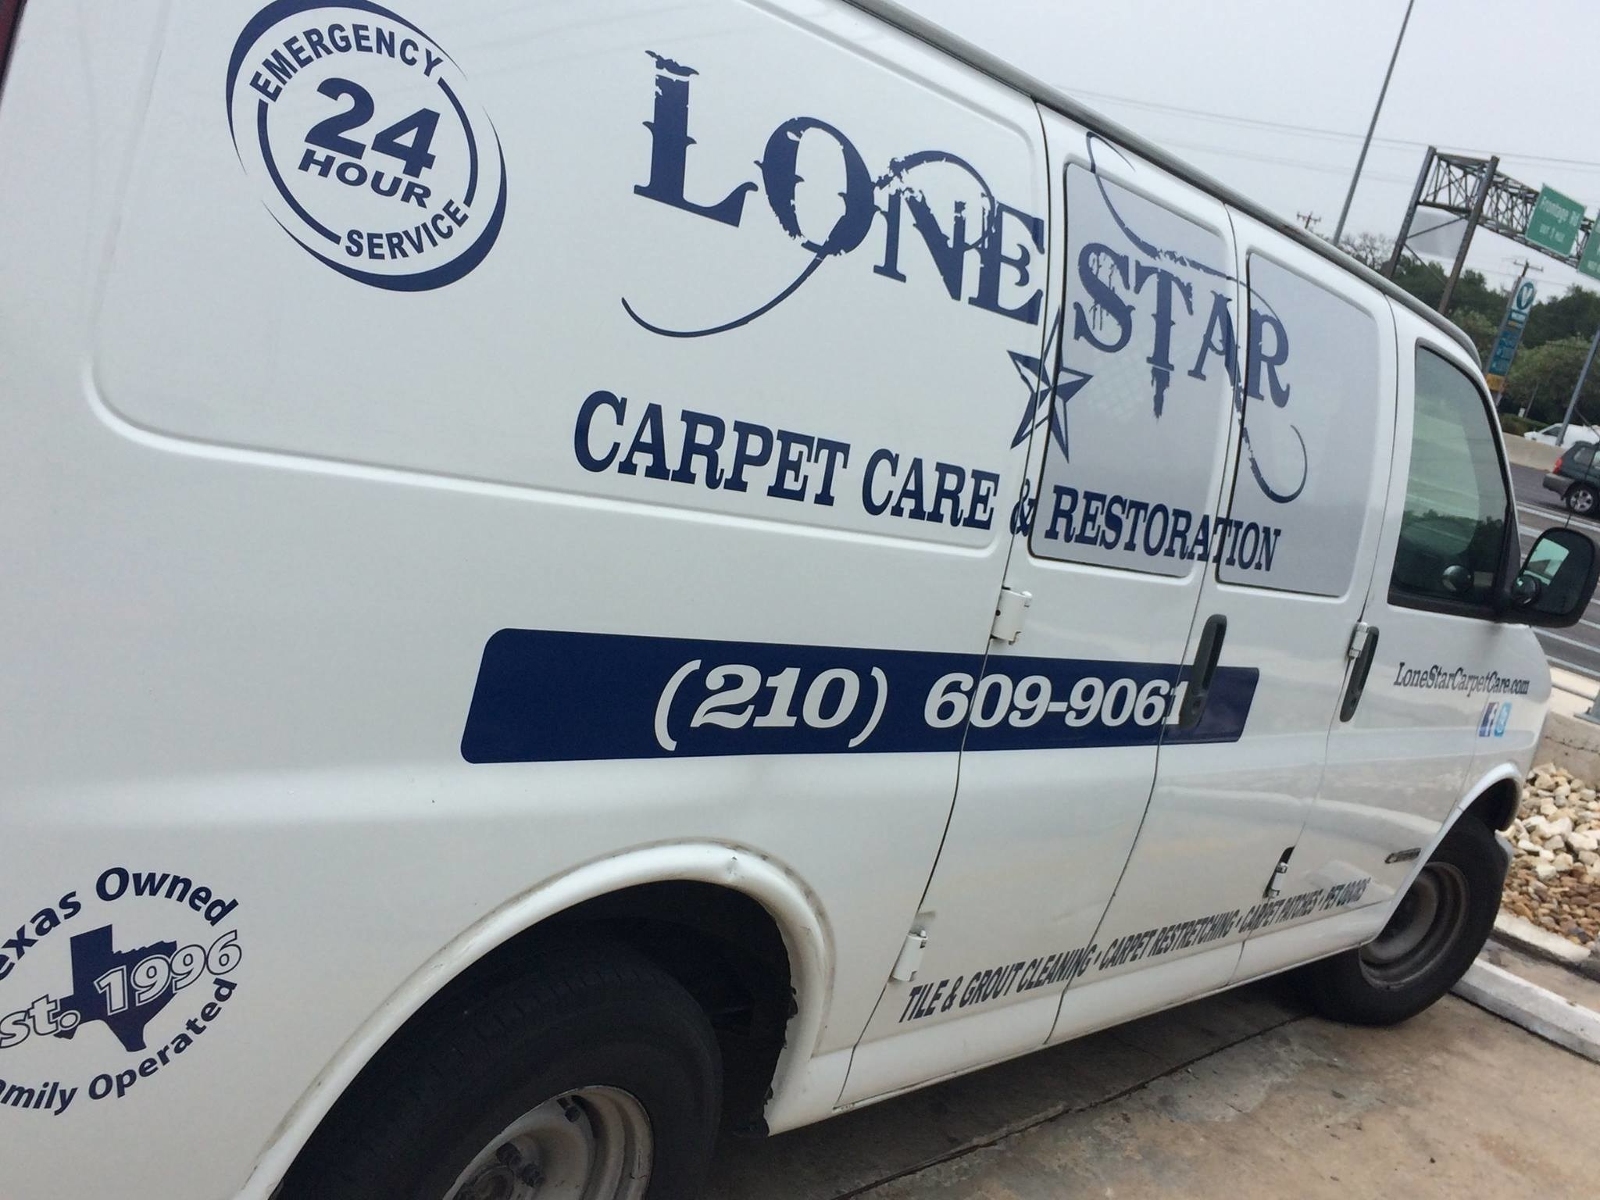 Lone Star Carpet Care And Restoration Offers Pet Odor Removal For Homes And …